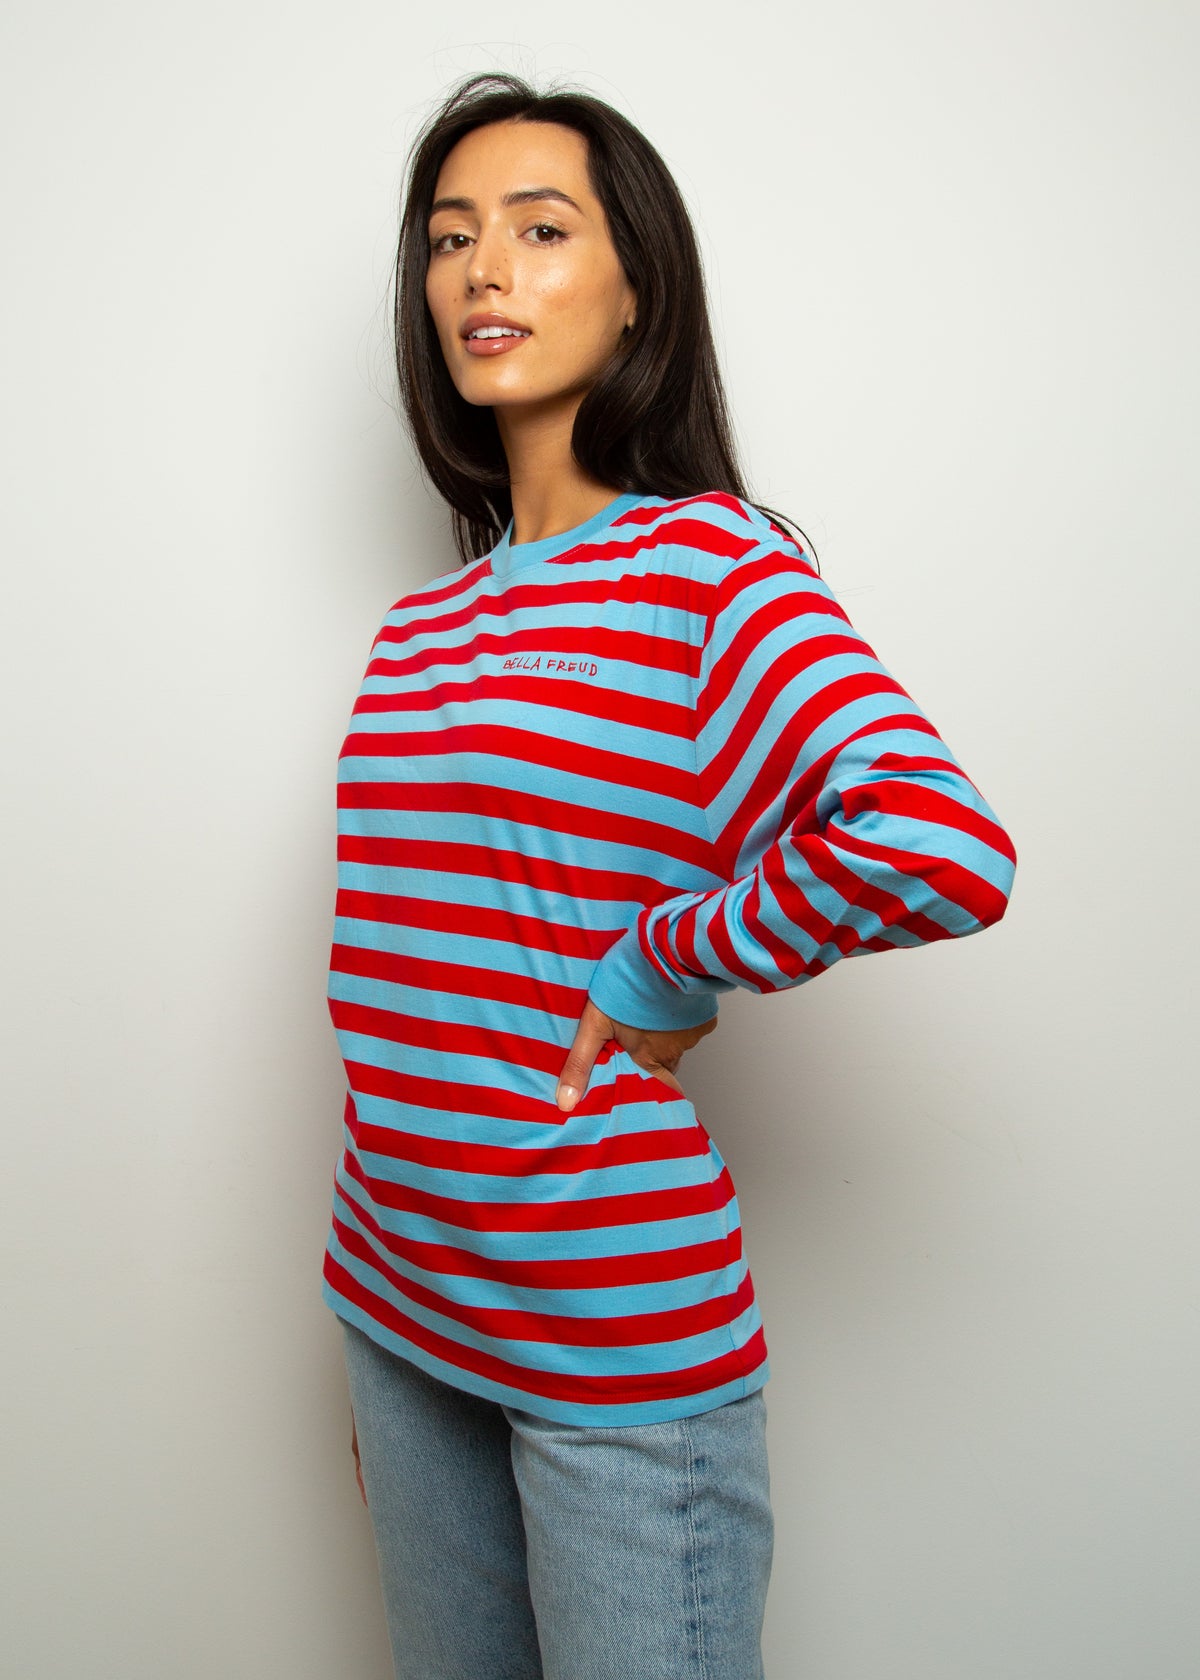 BF LS Striped Top in Blue, Red